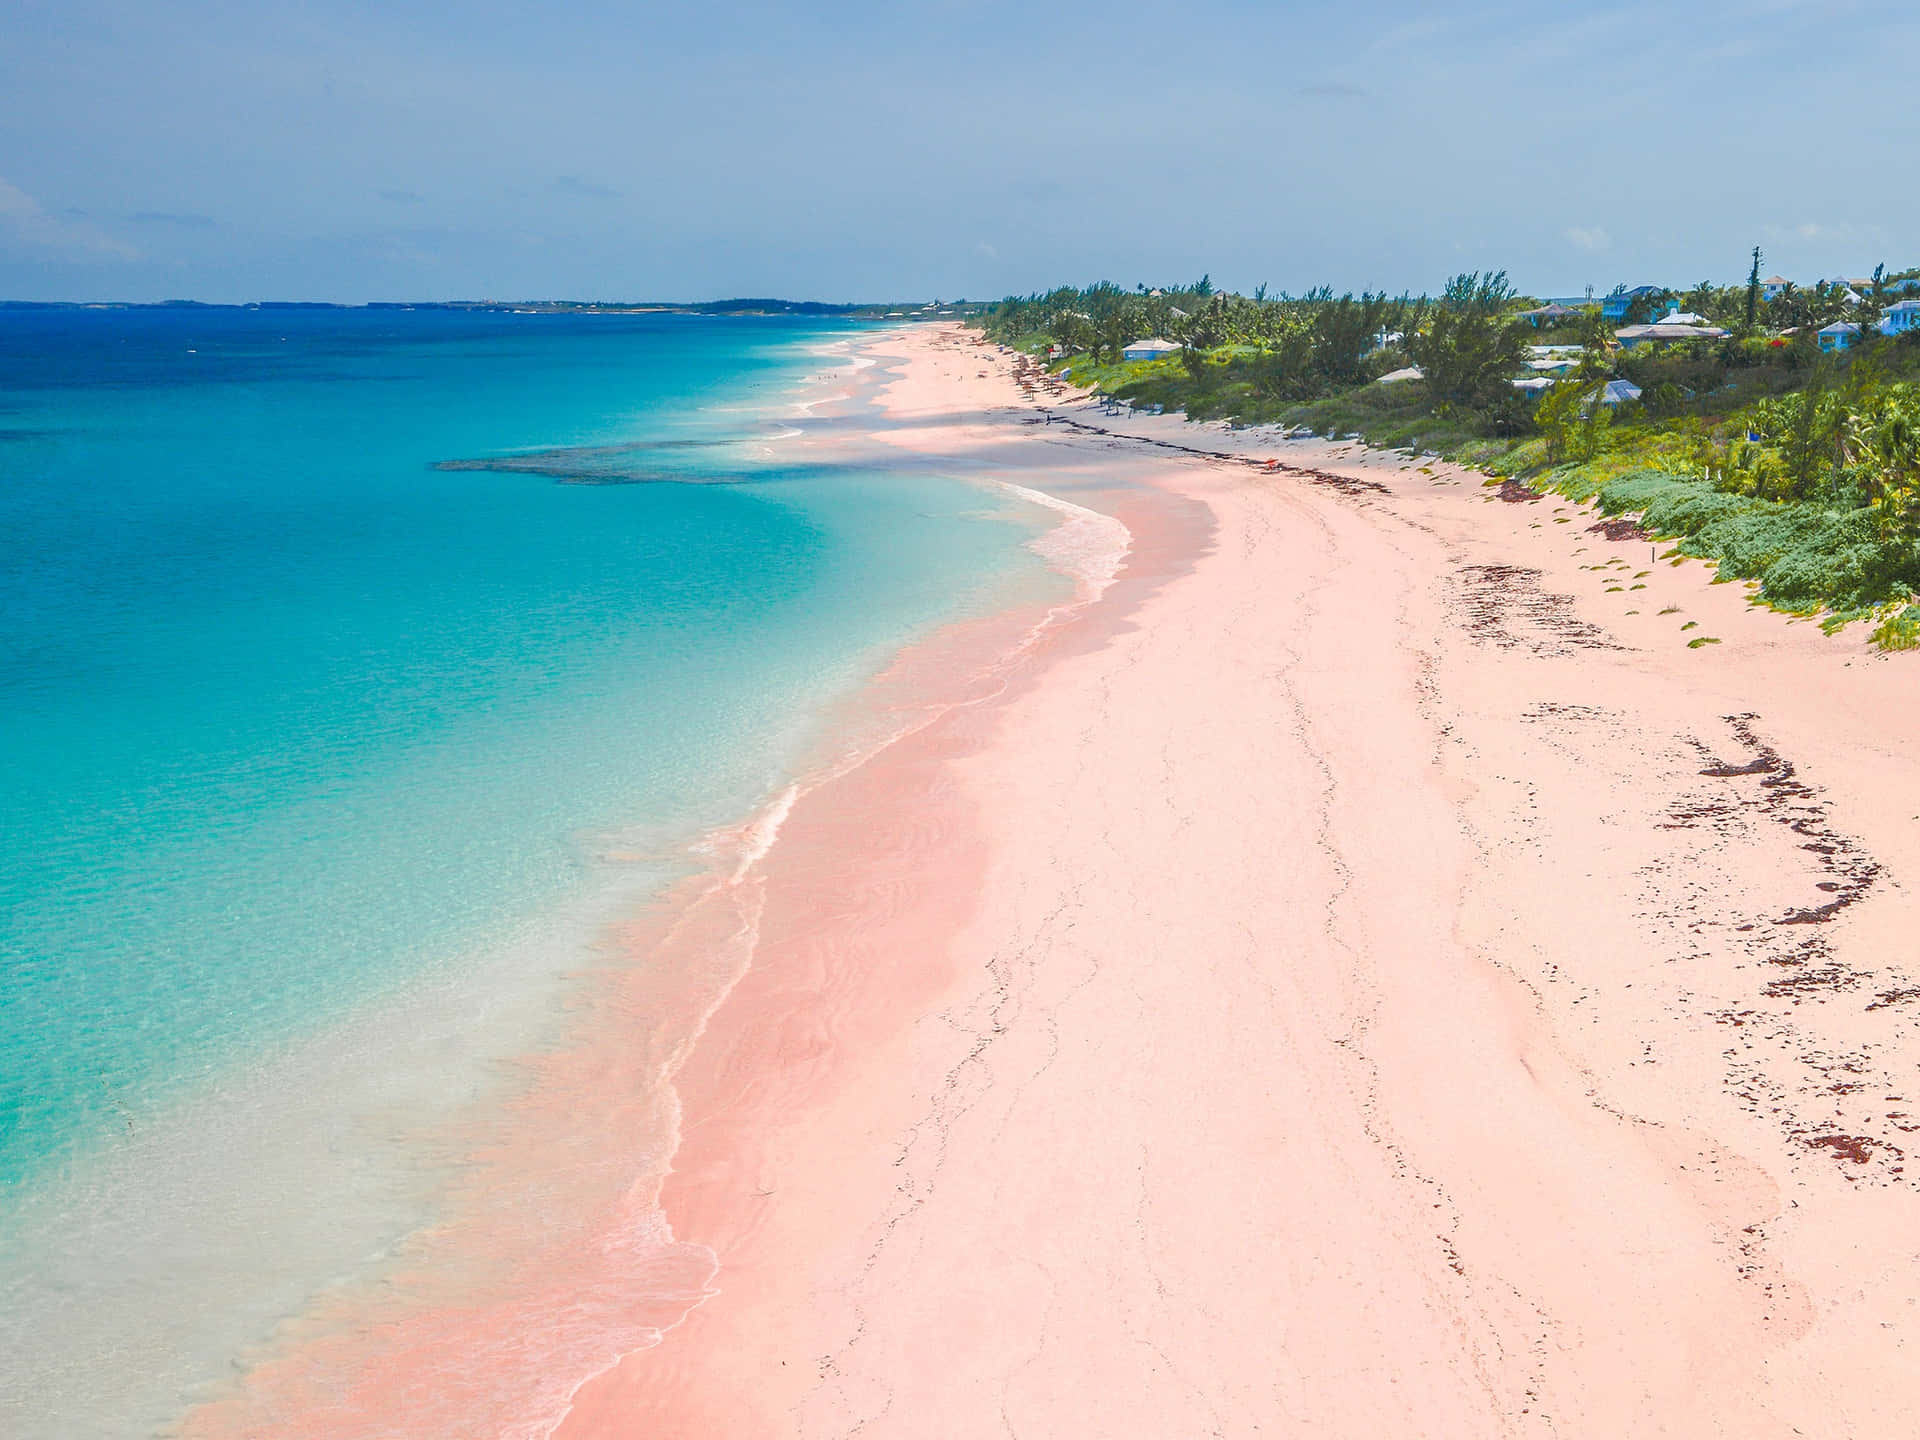 A breathtaking view of the unique Pink Sand Beach Wallpaper